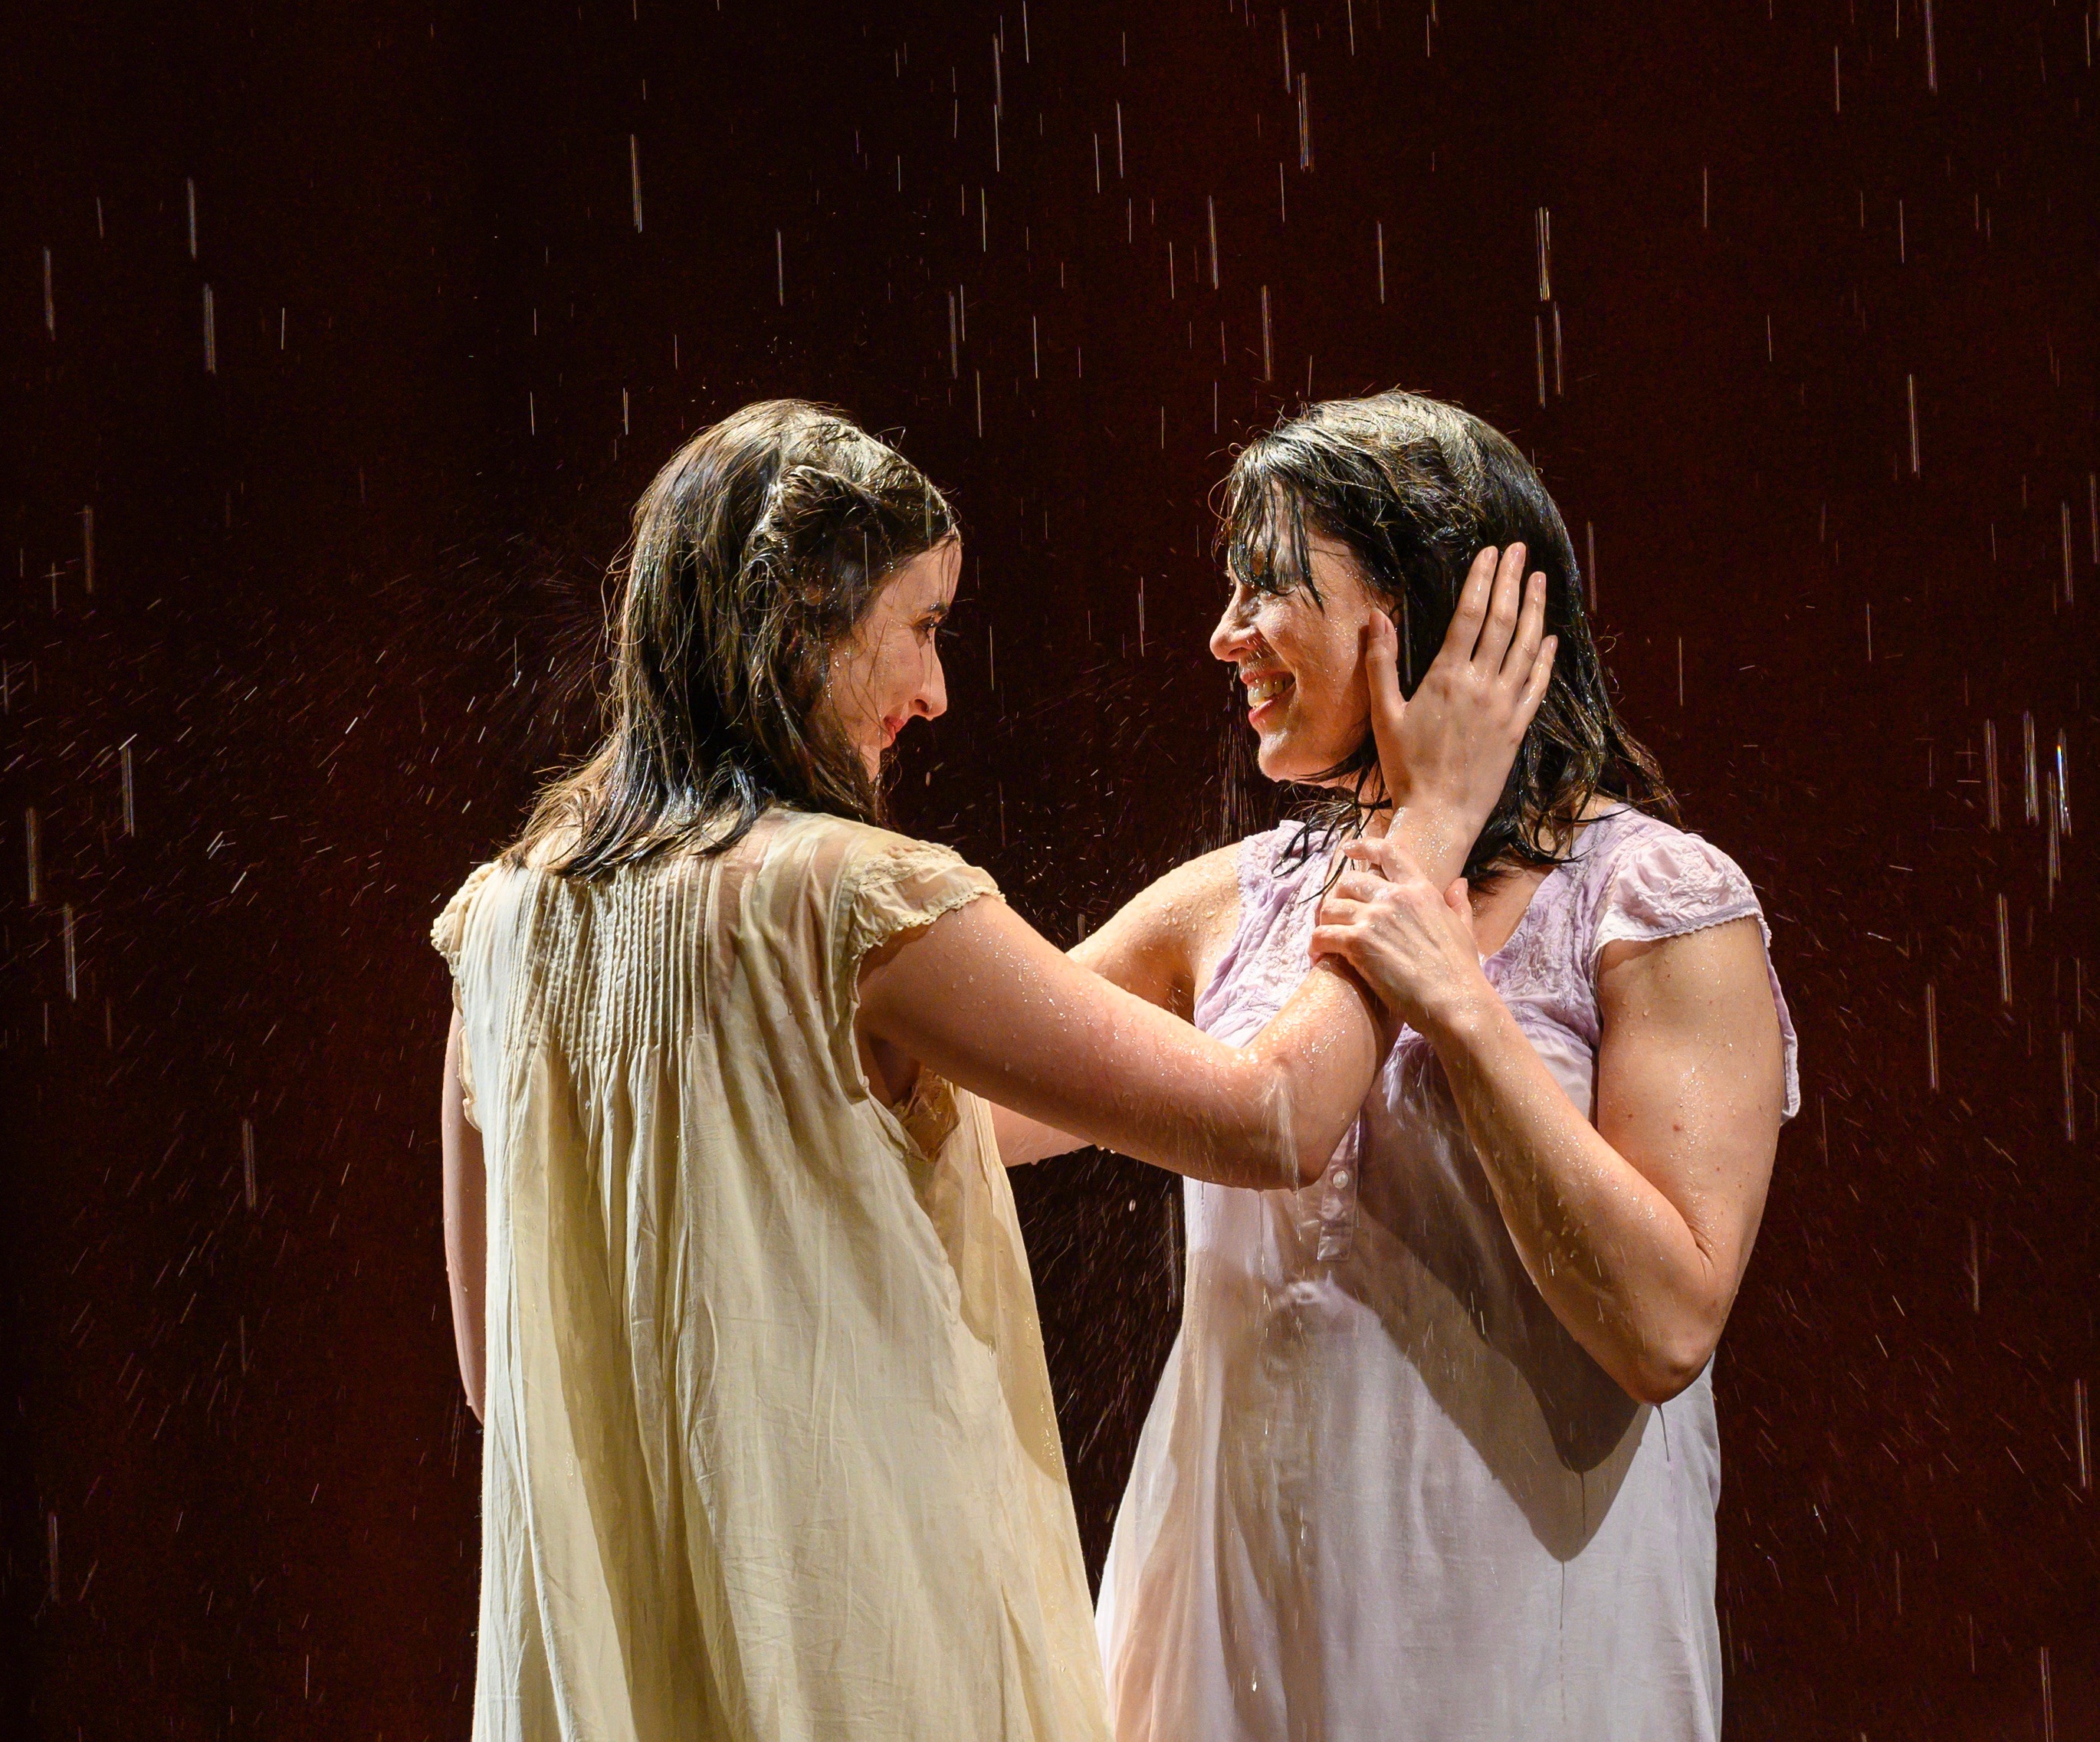 Rifkele and Manke (Emily Daly, L, and Meg Pryor) baptize their love in a spring shower.